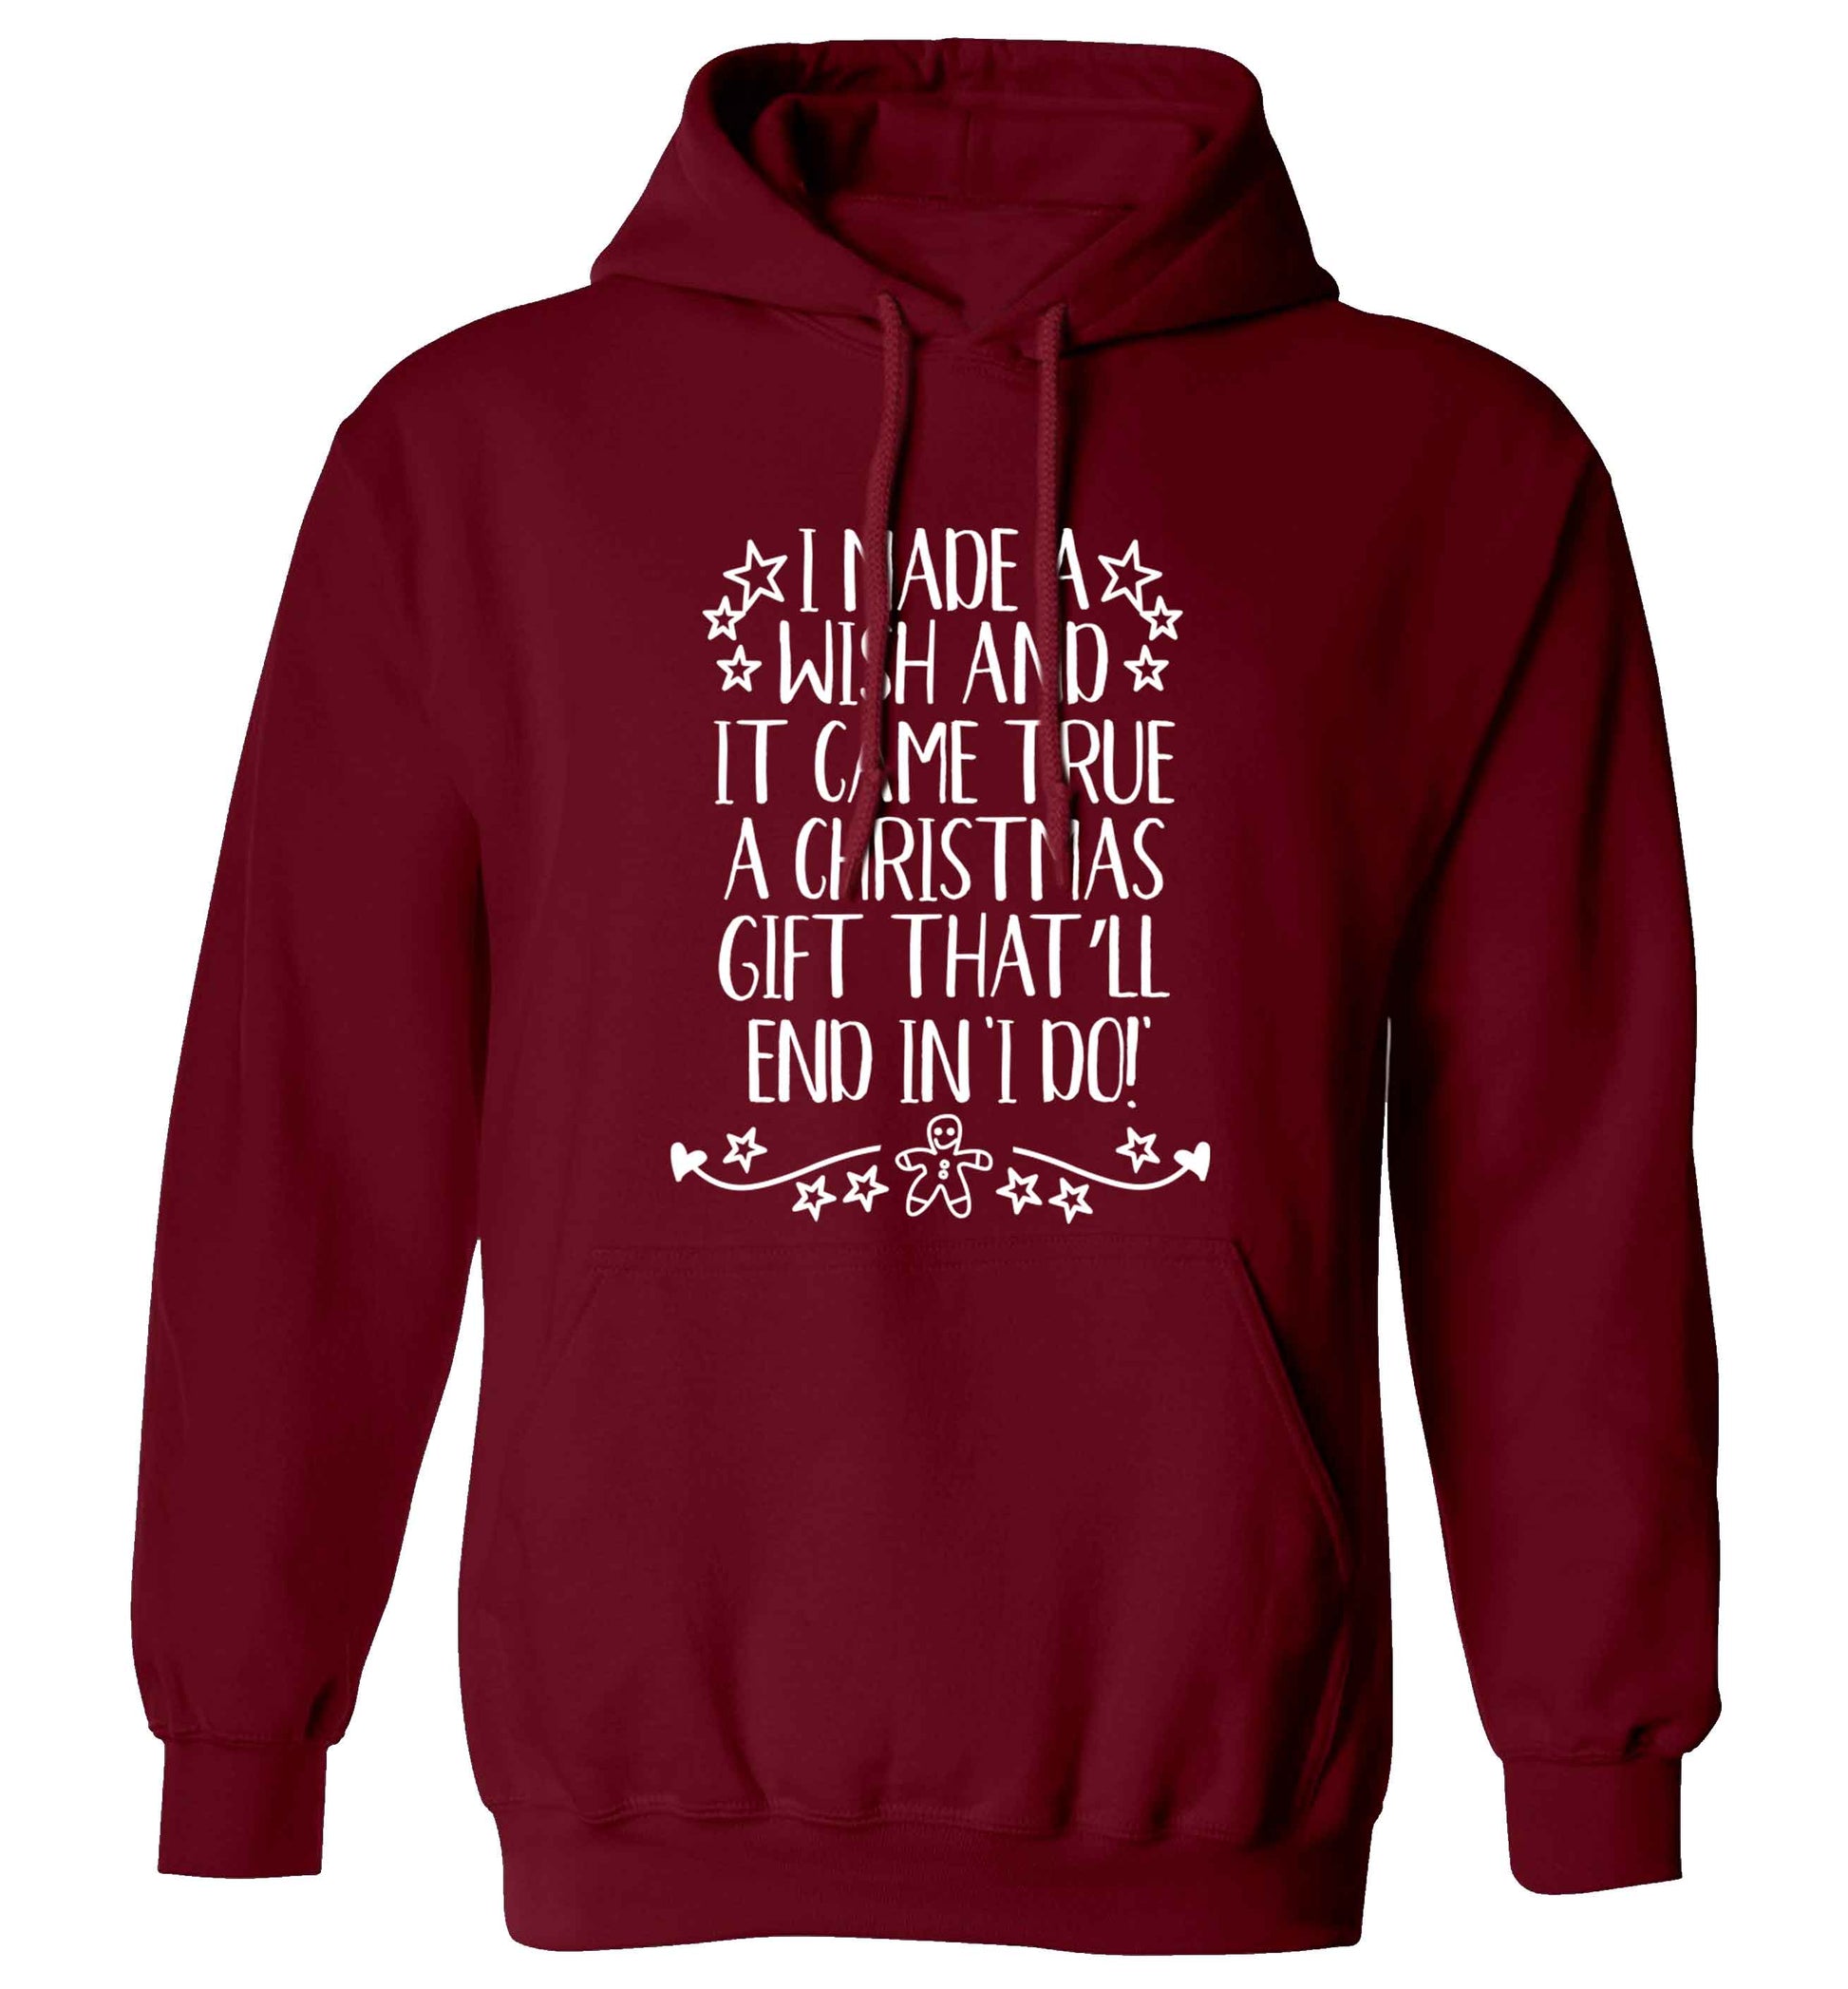 I made a wish and it came true a Christmas gift that'll end in 'I do' adults unisex maroon hoodie 2XL